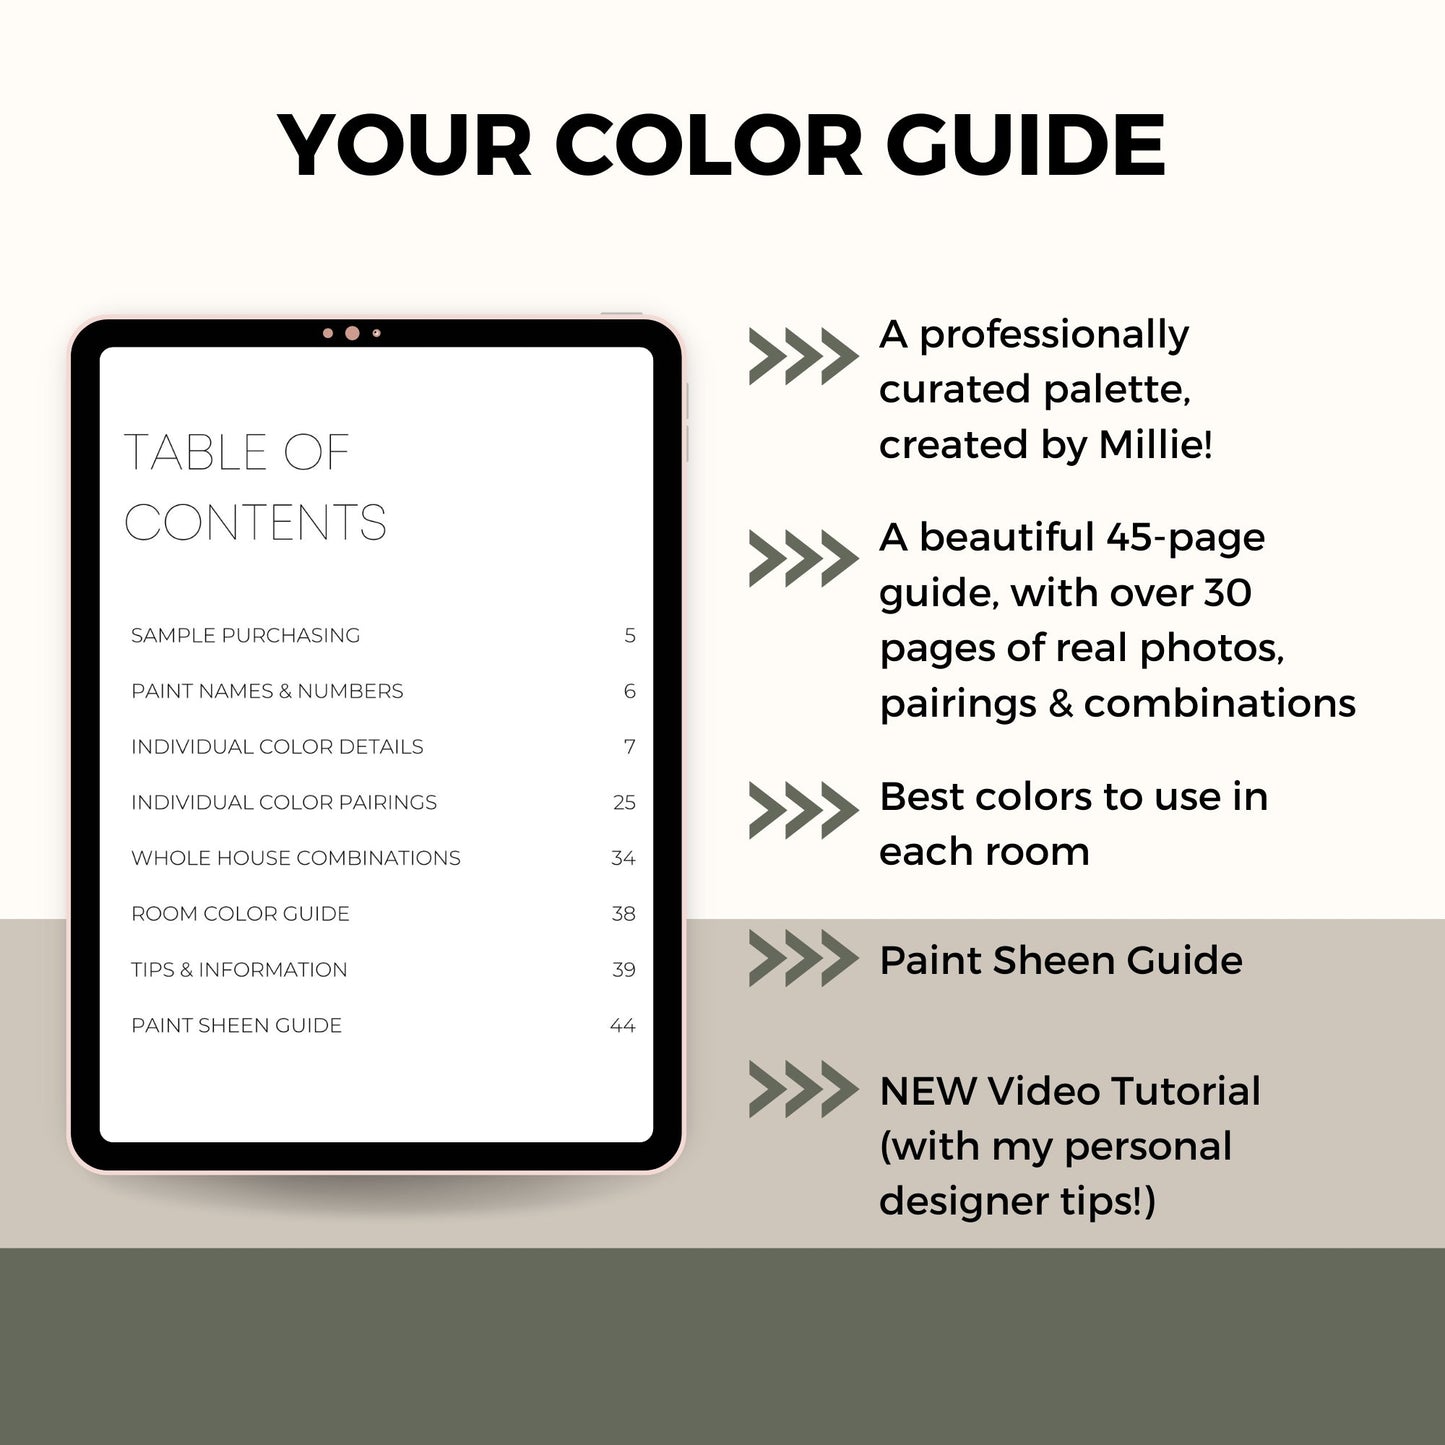 Lake Home Benjamin Moore Paint Palette - Modern Neutral Interior Paint Colors for Home, Coastal Interior Design Color Palette, Lake House, Benjamin Moore Jack Pine